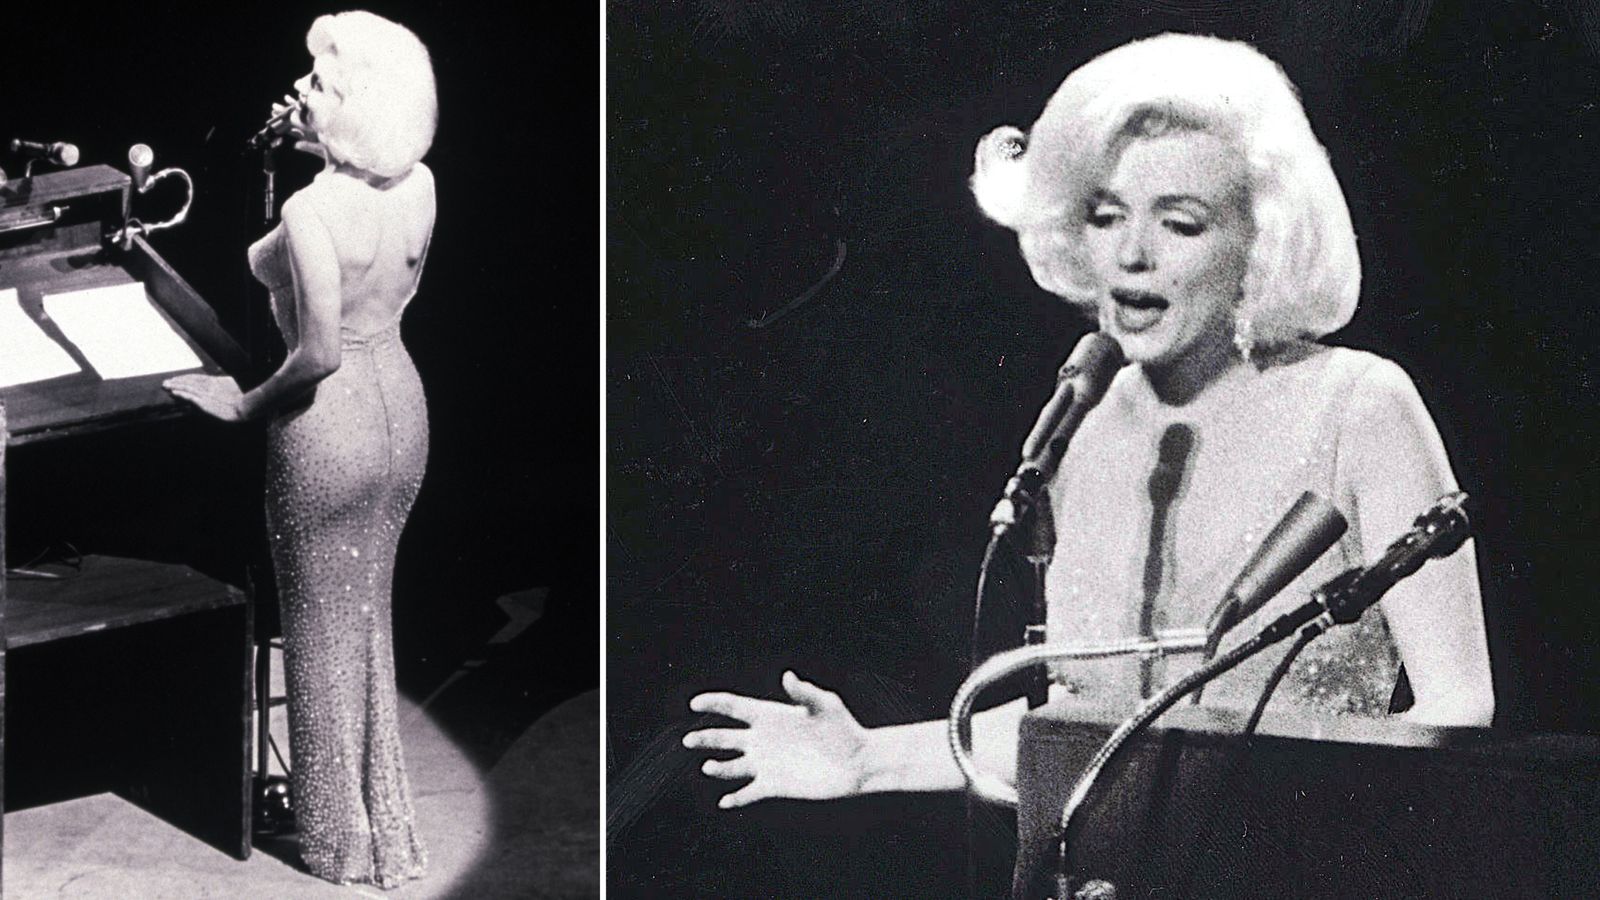 Marilyn Monroes Happy Birthday Dress Sold For 48m Ents And Arts News 